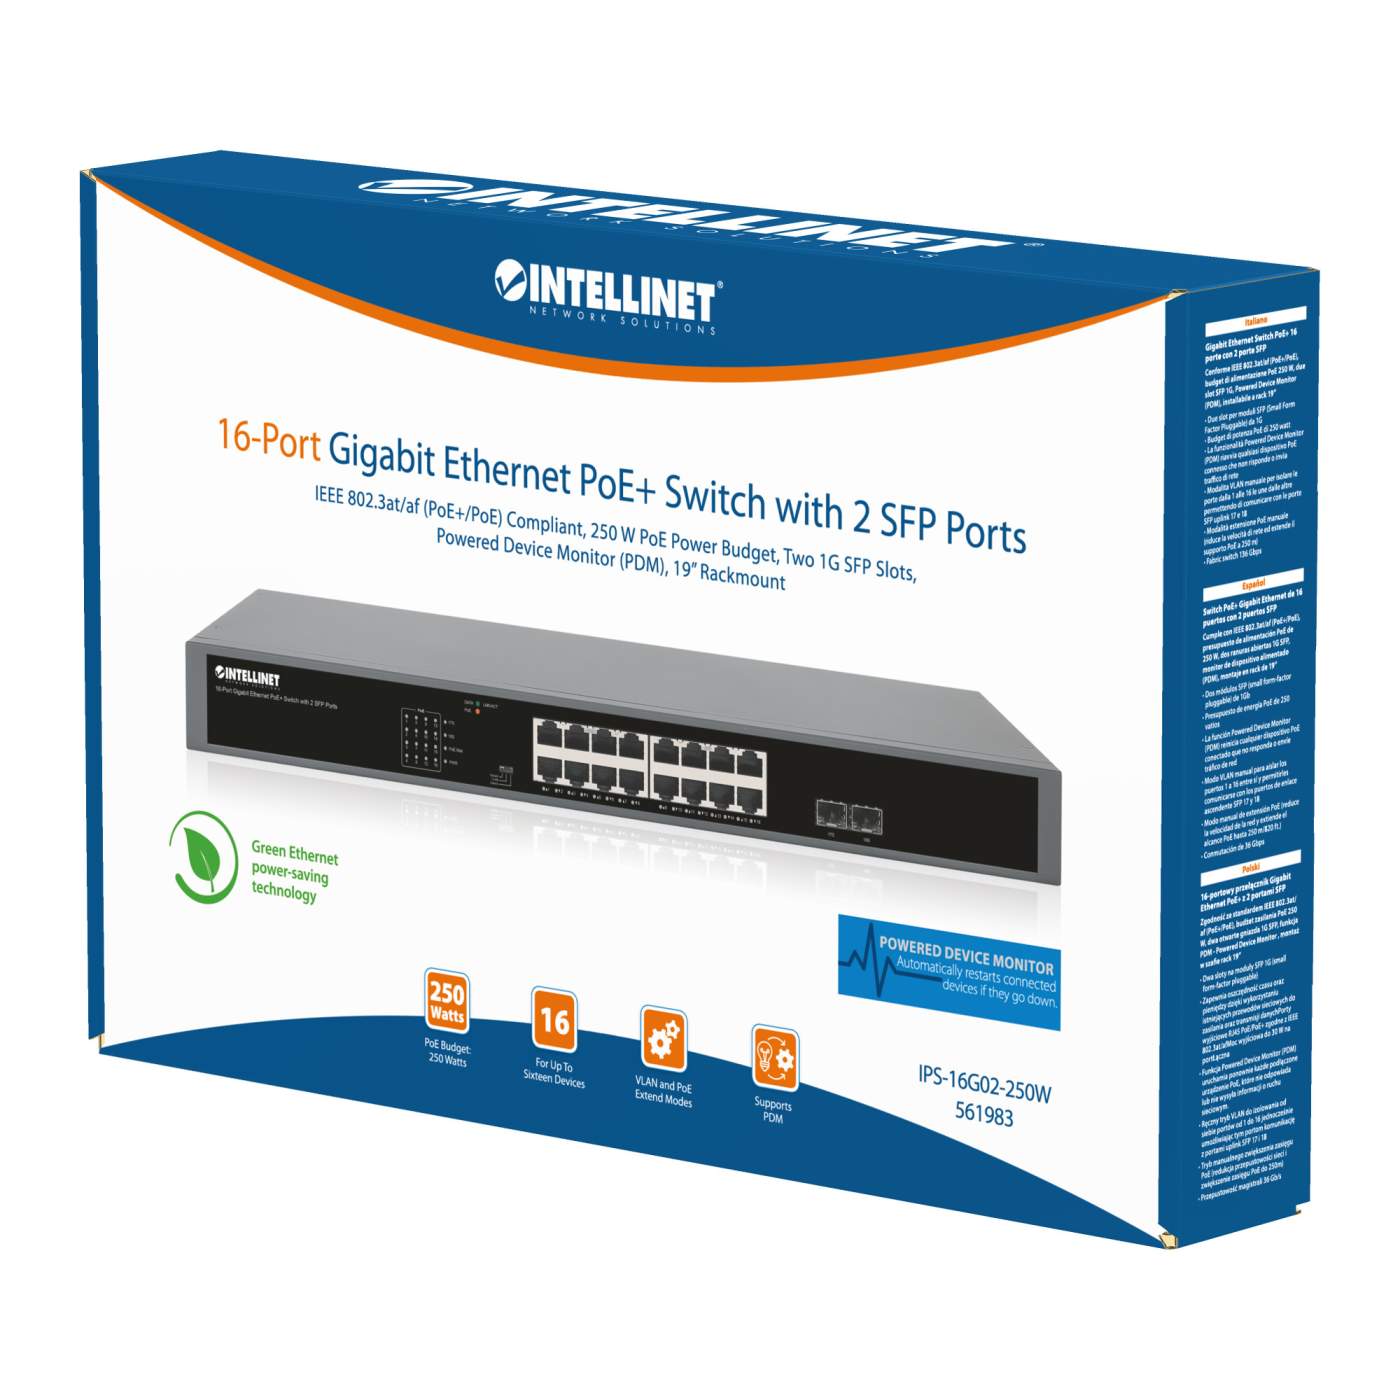 16-Port Gigabit Ethernet PoE+ Switch with 2 SFP Ports Packaging Image 2